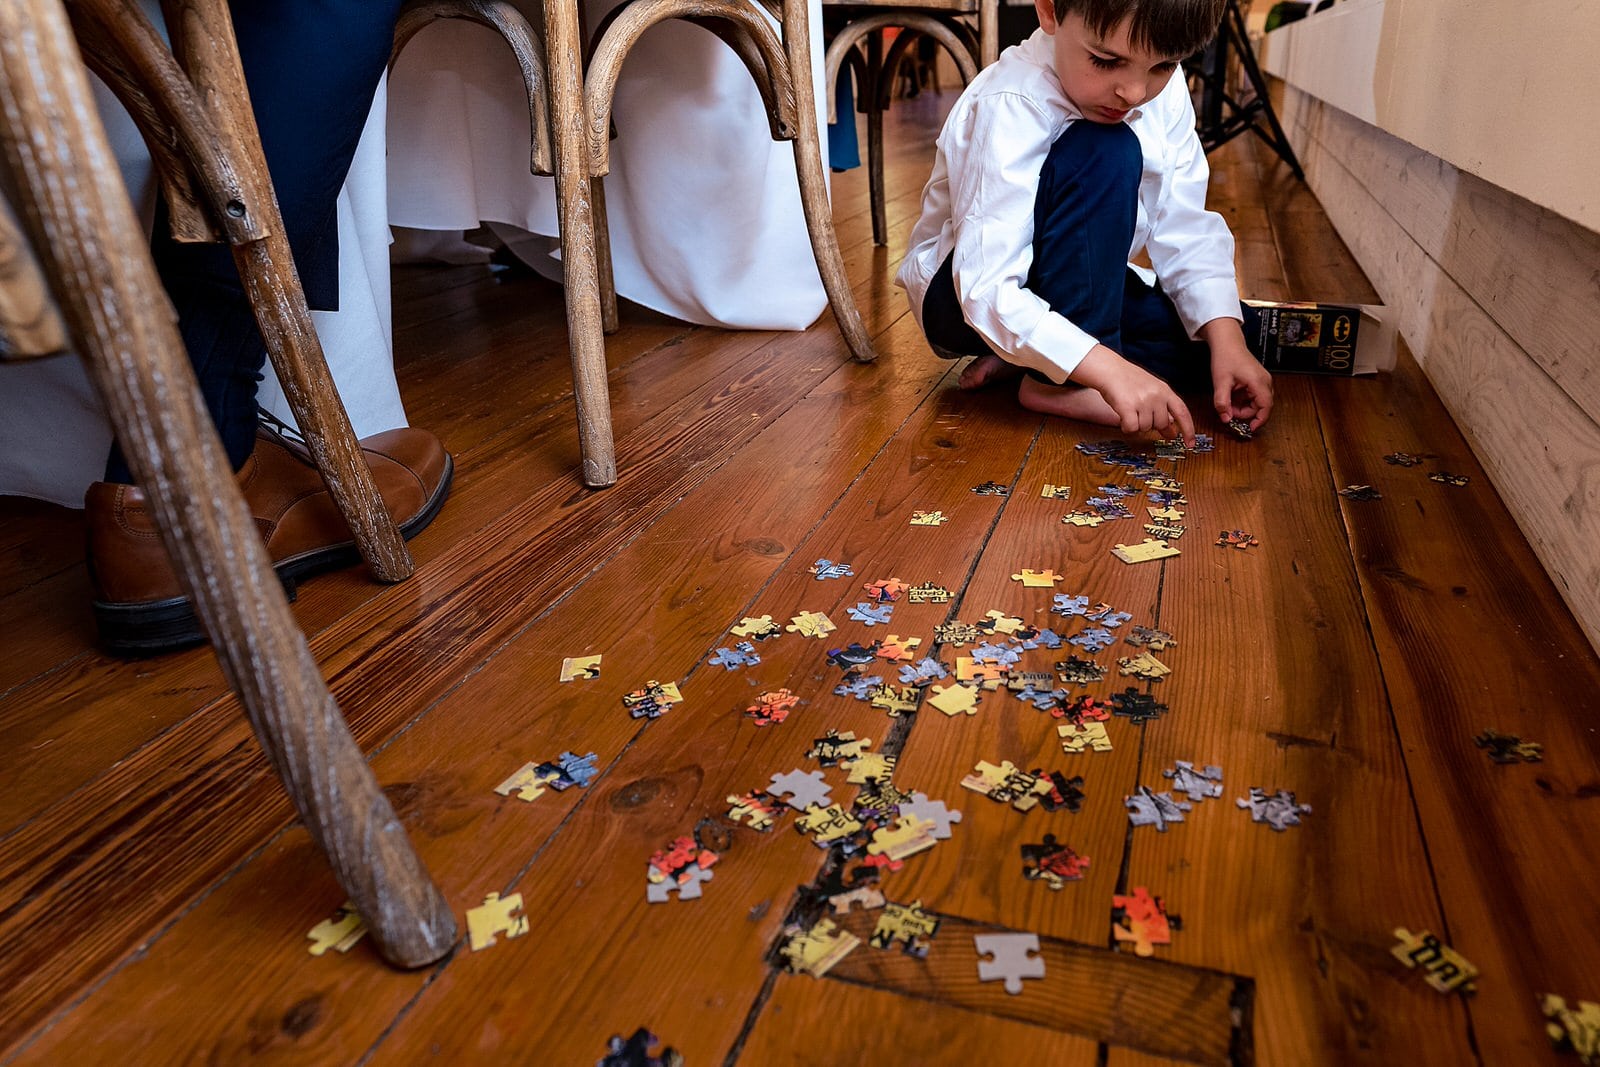 Have activities for the kids at your wedding reception